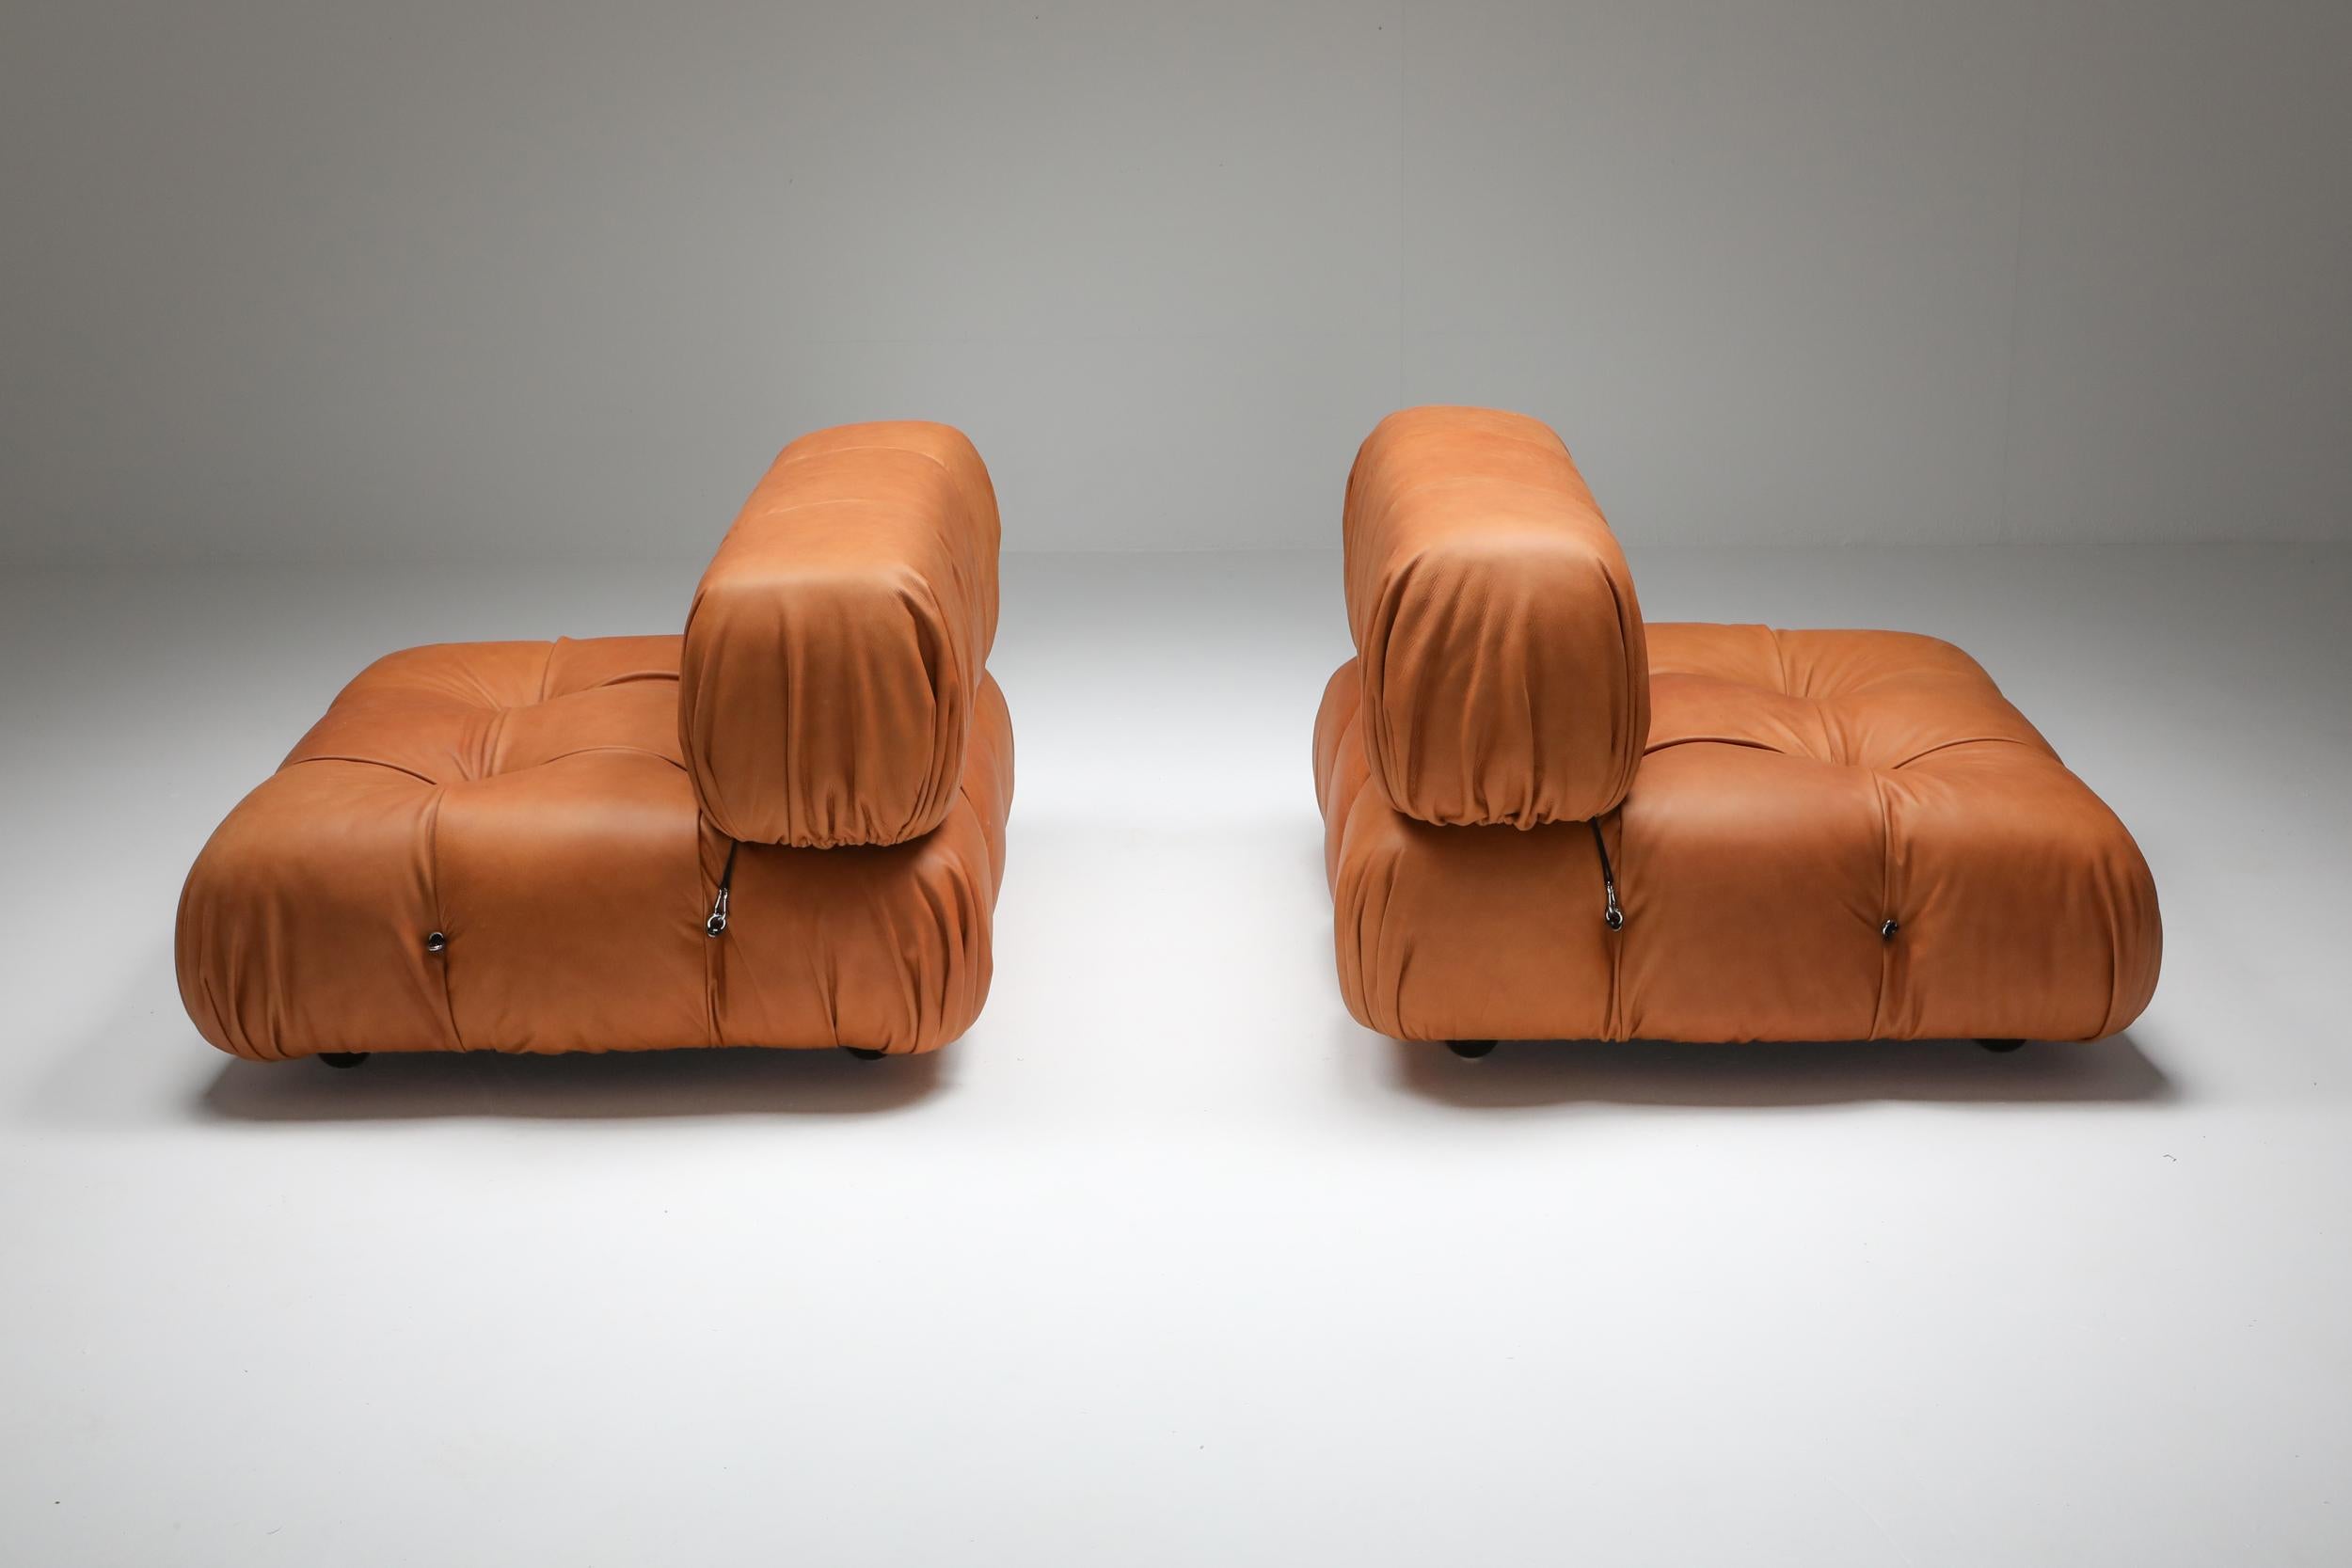 Post-Modern Camaleonda Lounge Chairs in New Cognac Leather by Mario Bellini